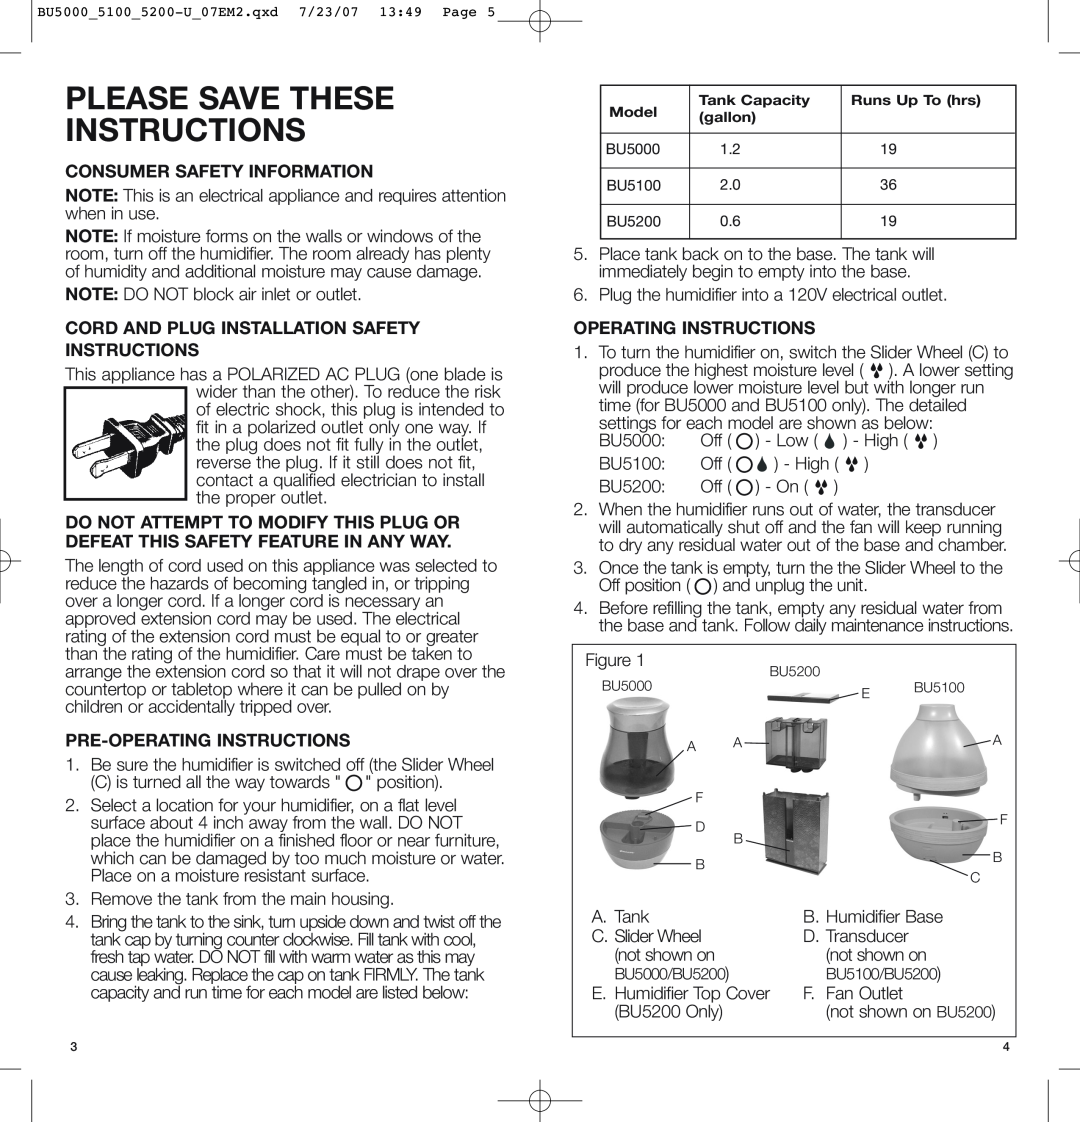 Bionaire BU5200 Consumer Safety Information, Cord And Plug Installation Safety Instructions, Pre-Operatinginstructions 